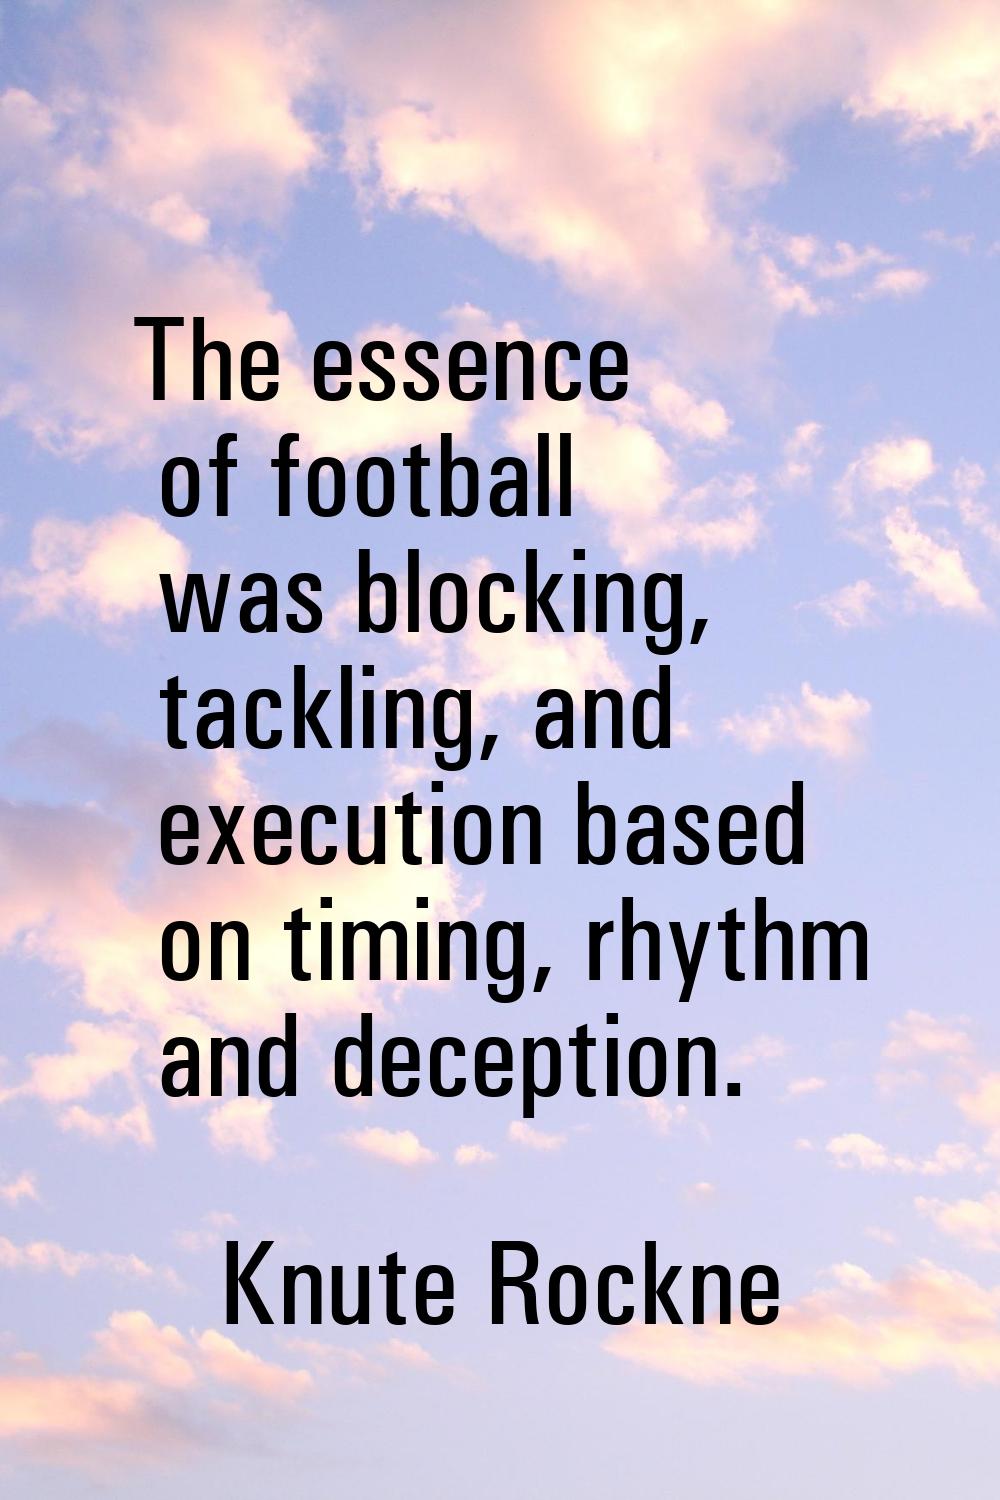 The essence of football was blocking, tackling, and execution based on timing, rhythm and deception